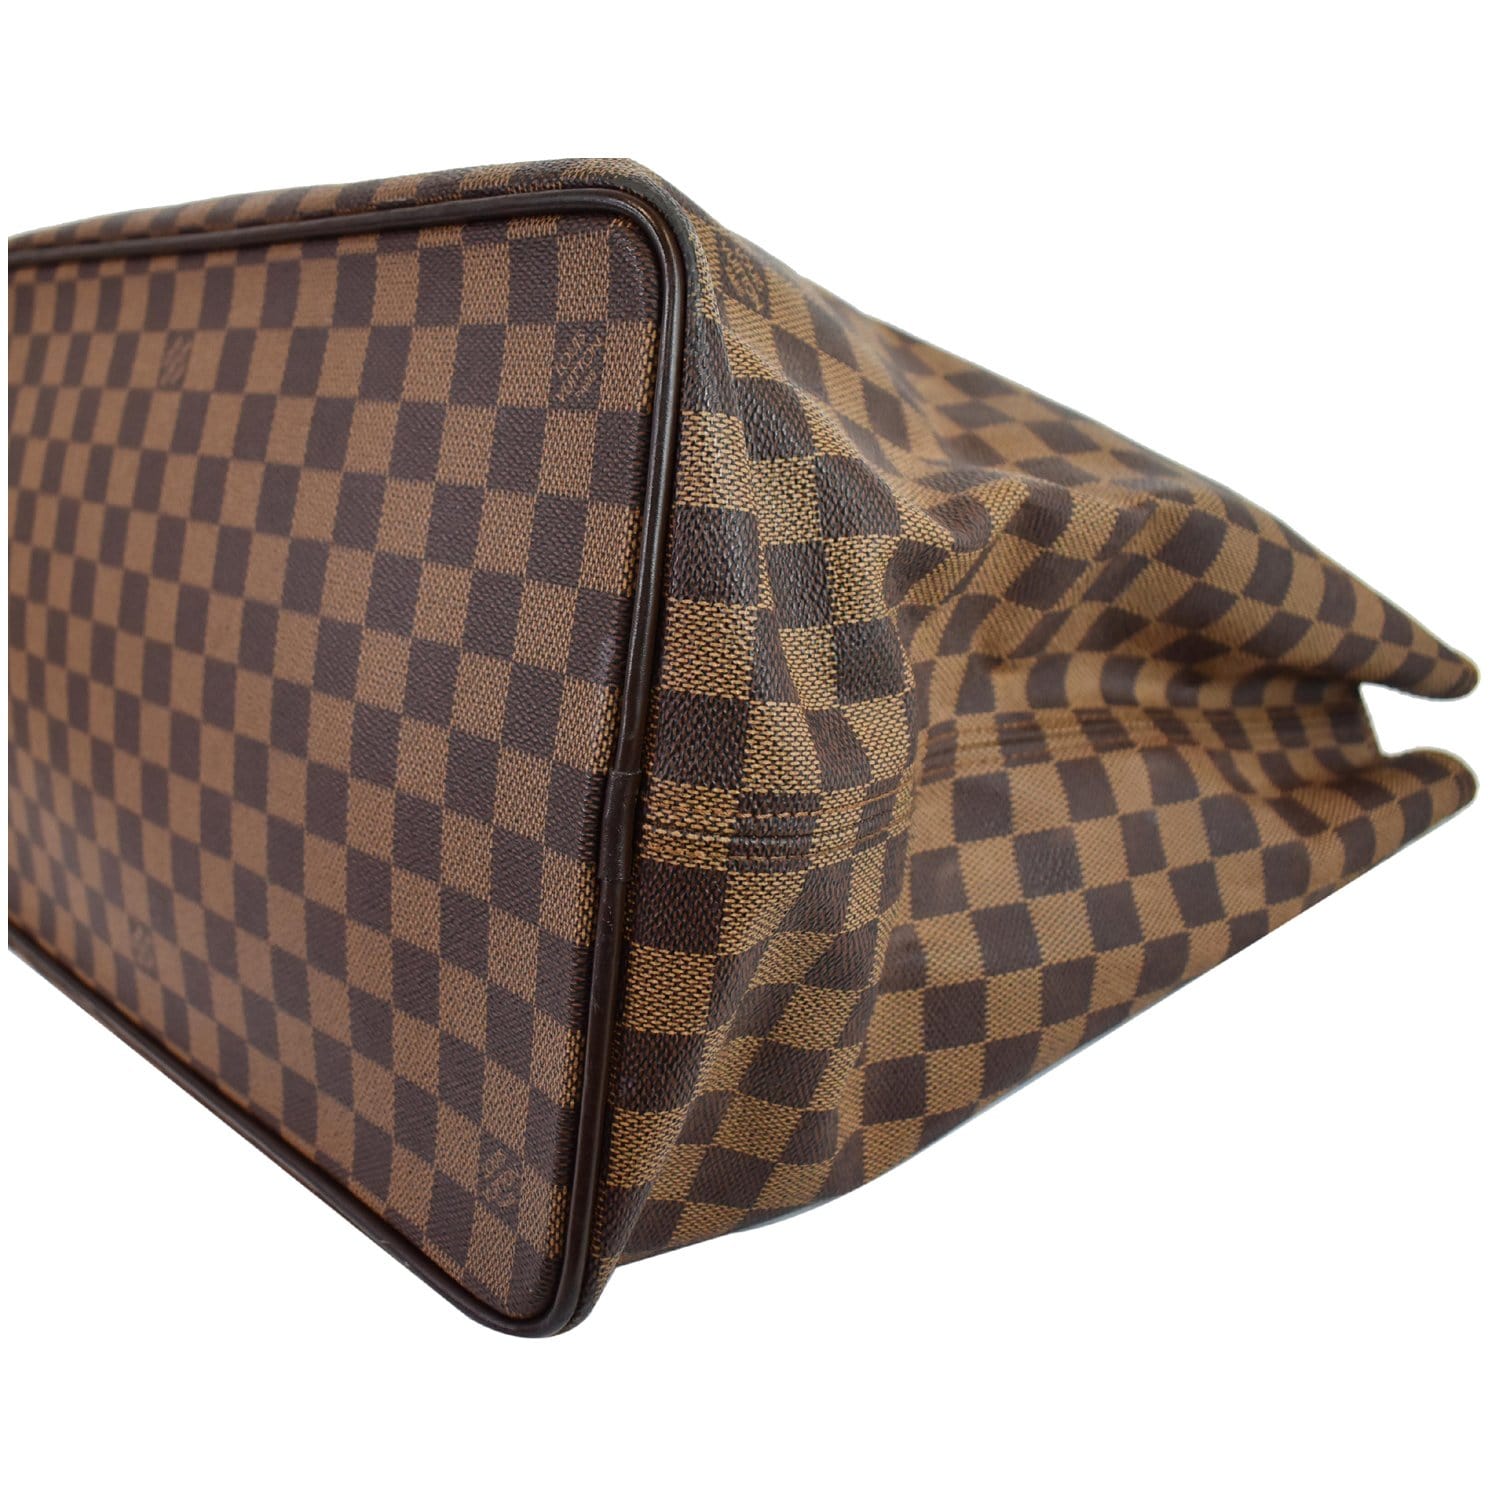 Cosmetic Pouch PM Damier Ebene Canvas - Travel